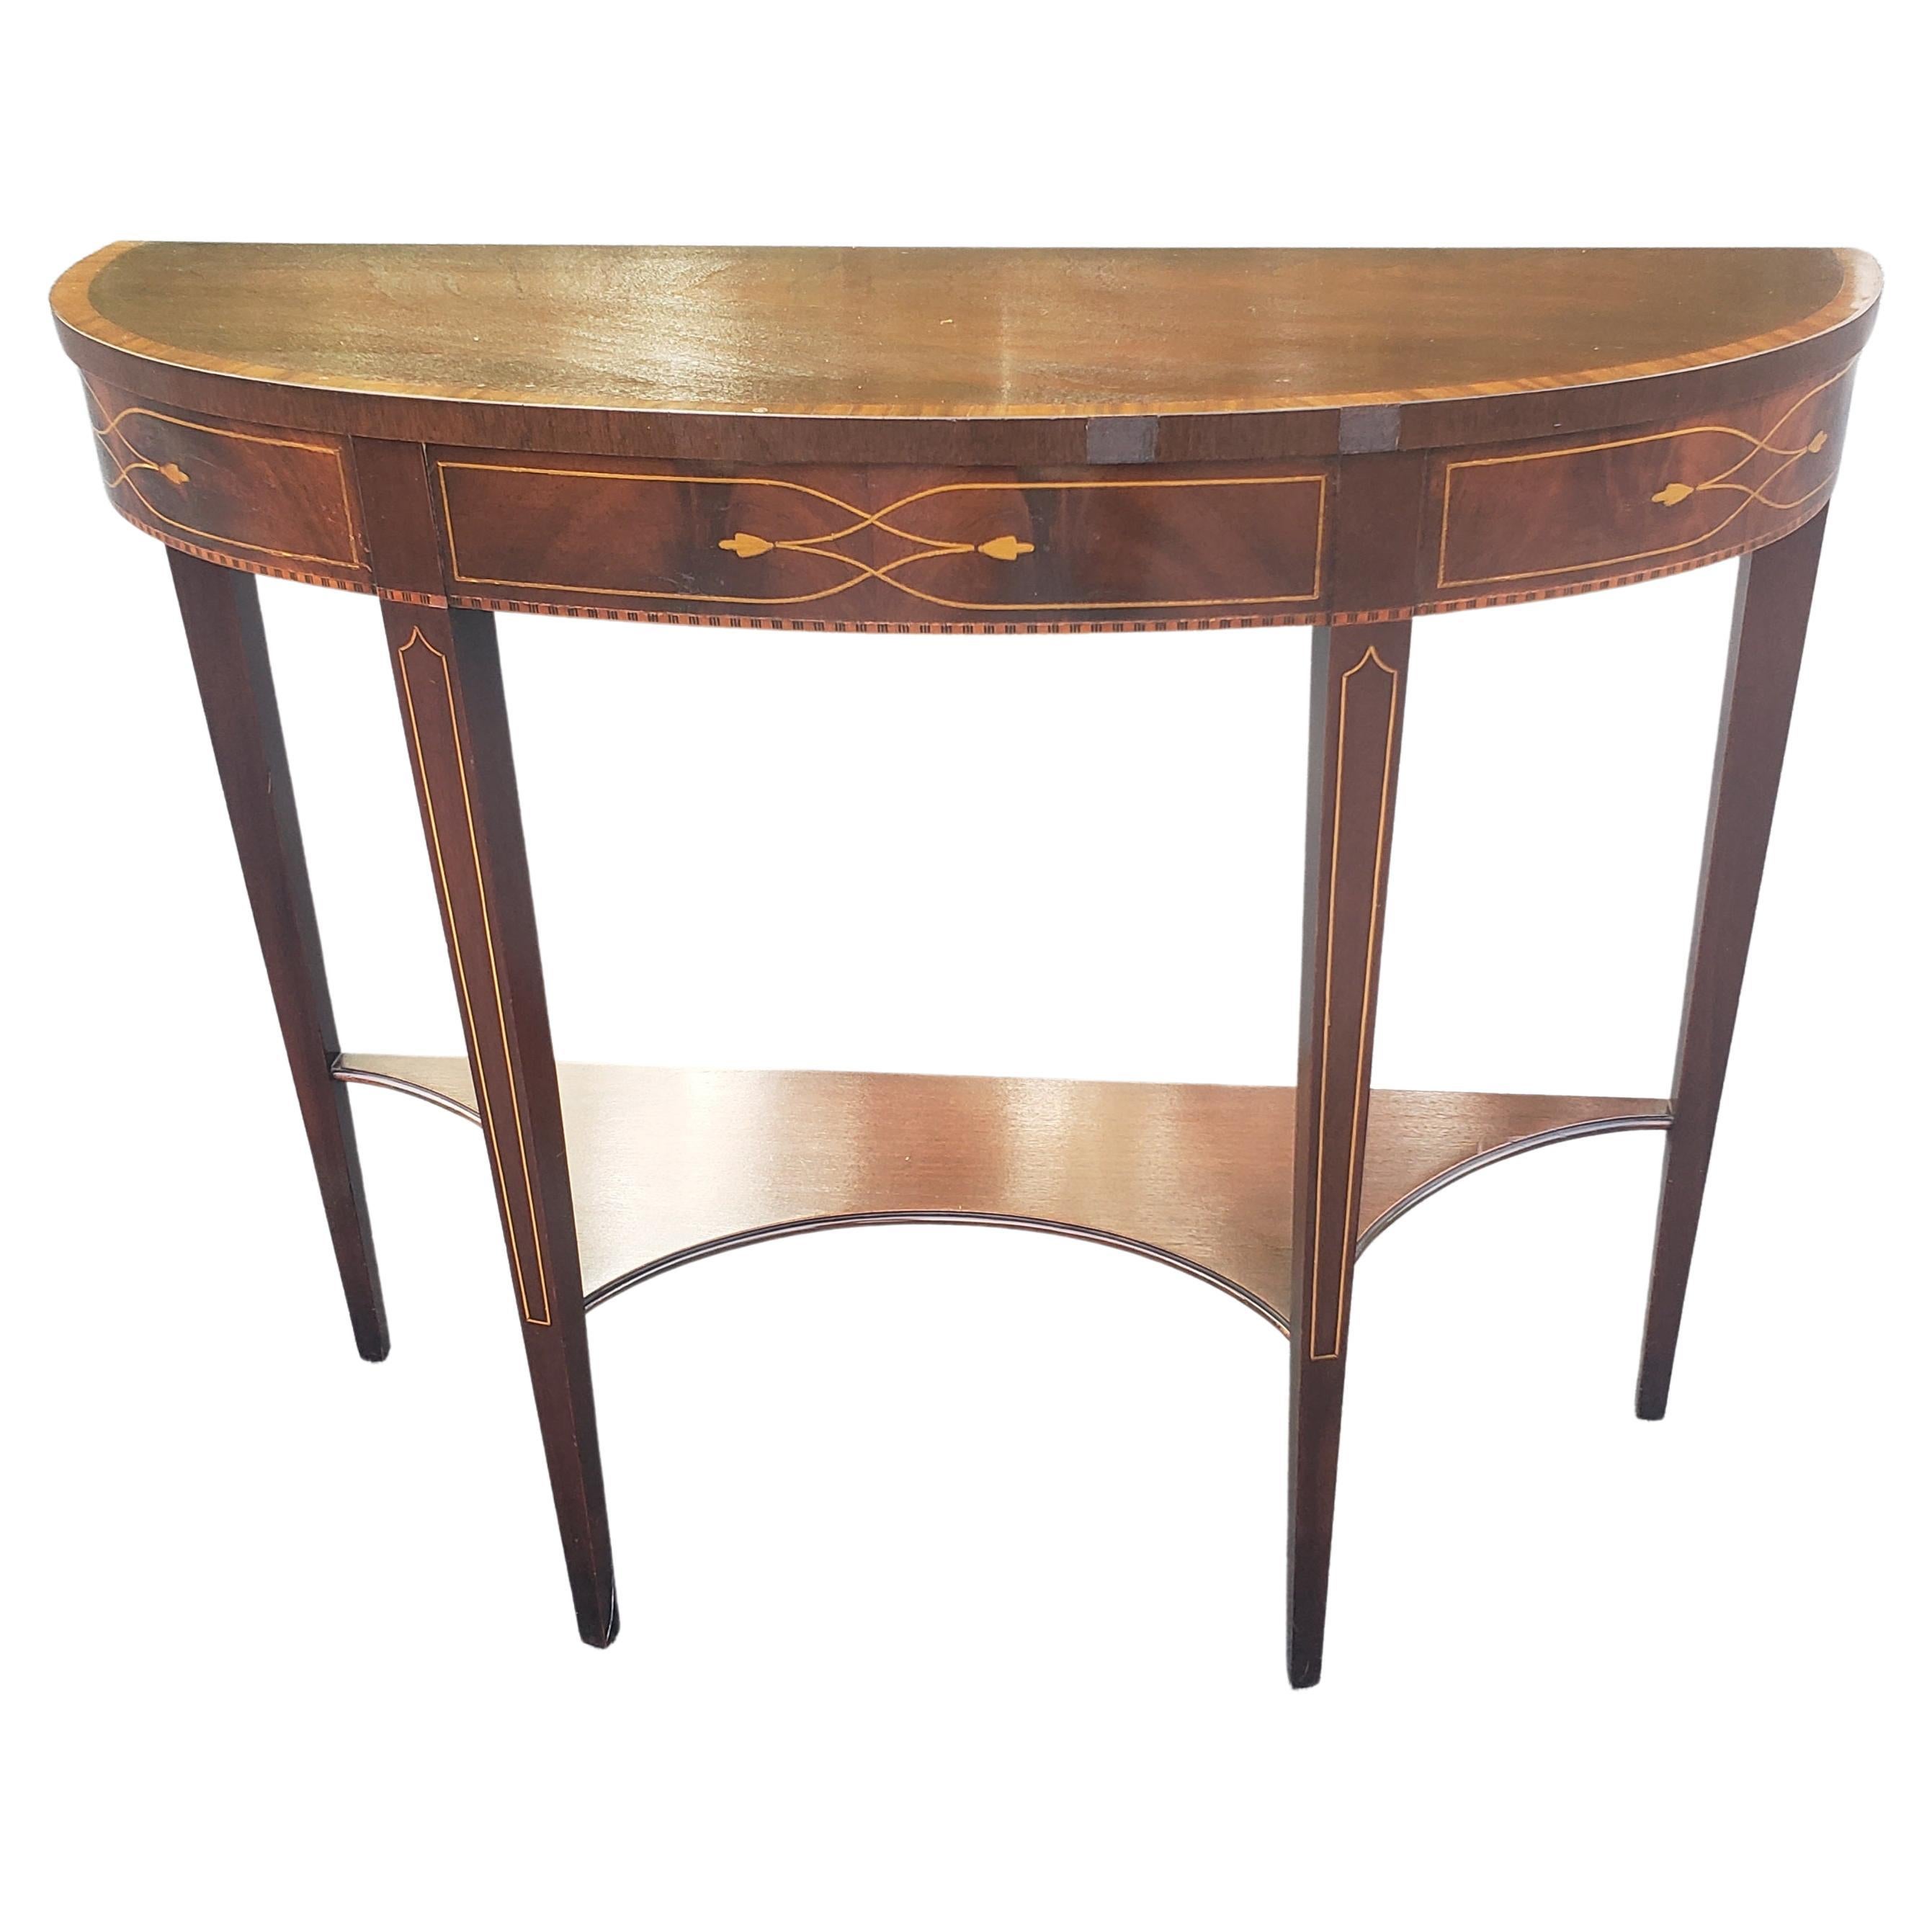 20th Century 1930s Federal Two-Tier Mahogany and Satinwood Inlaid Demilune Console Table